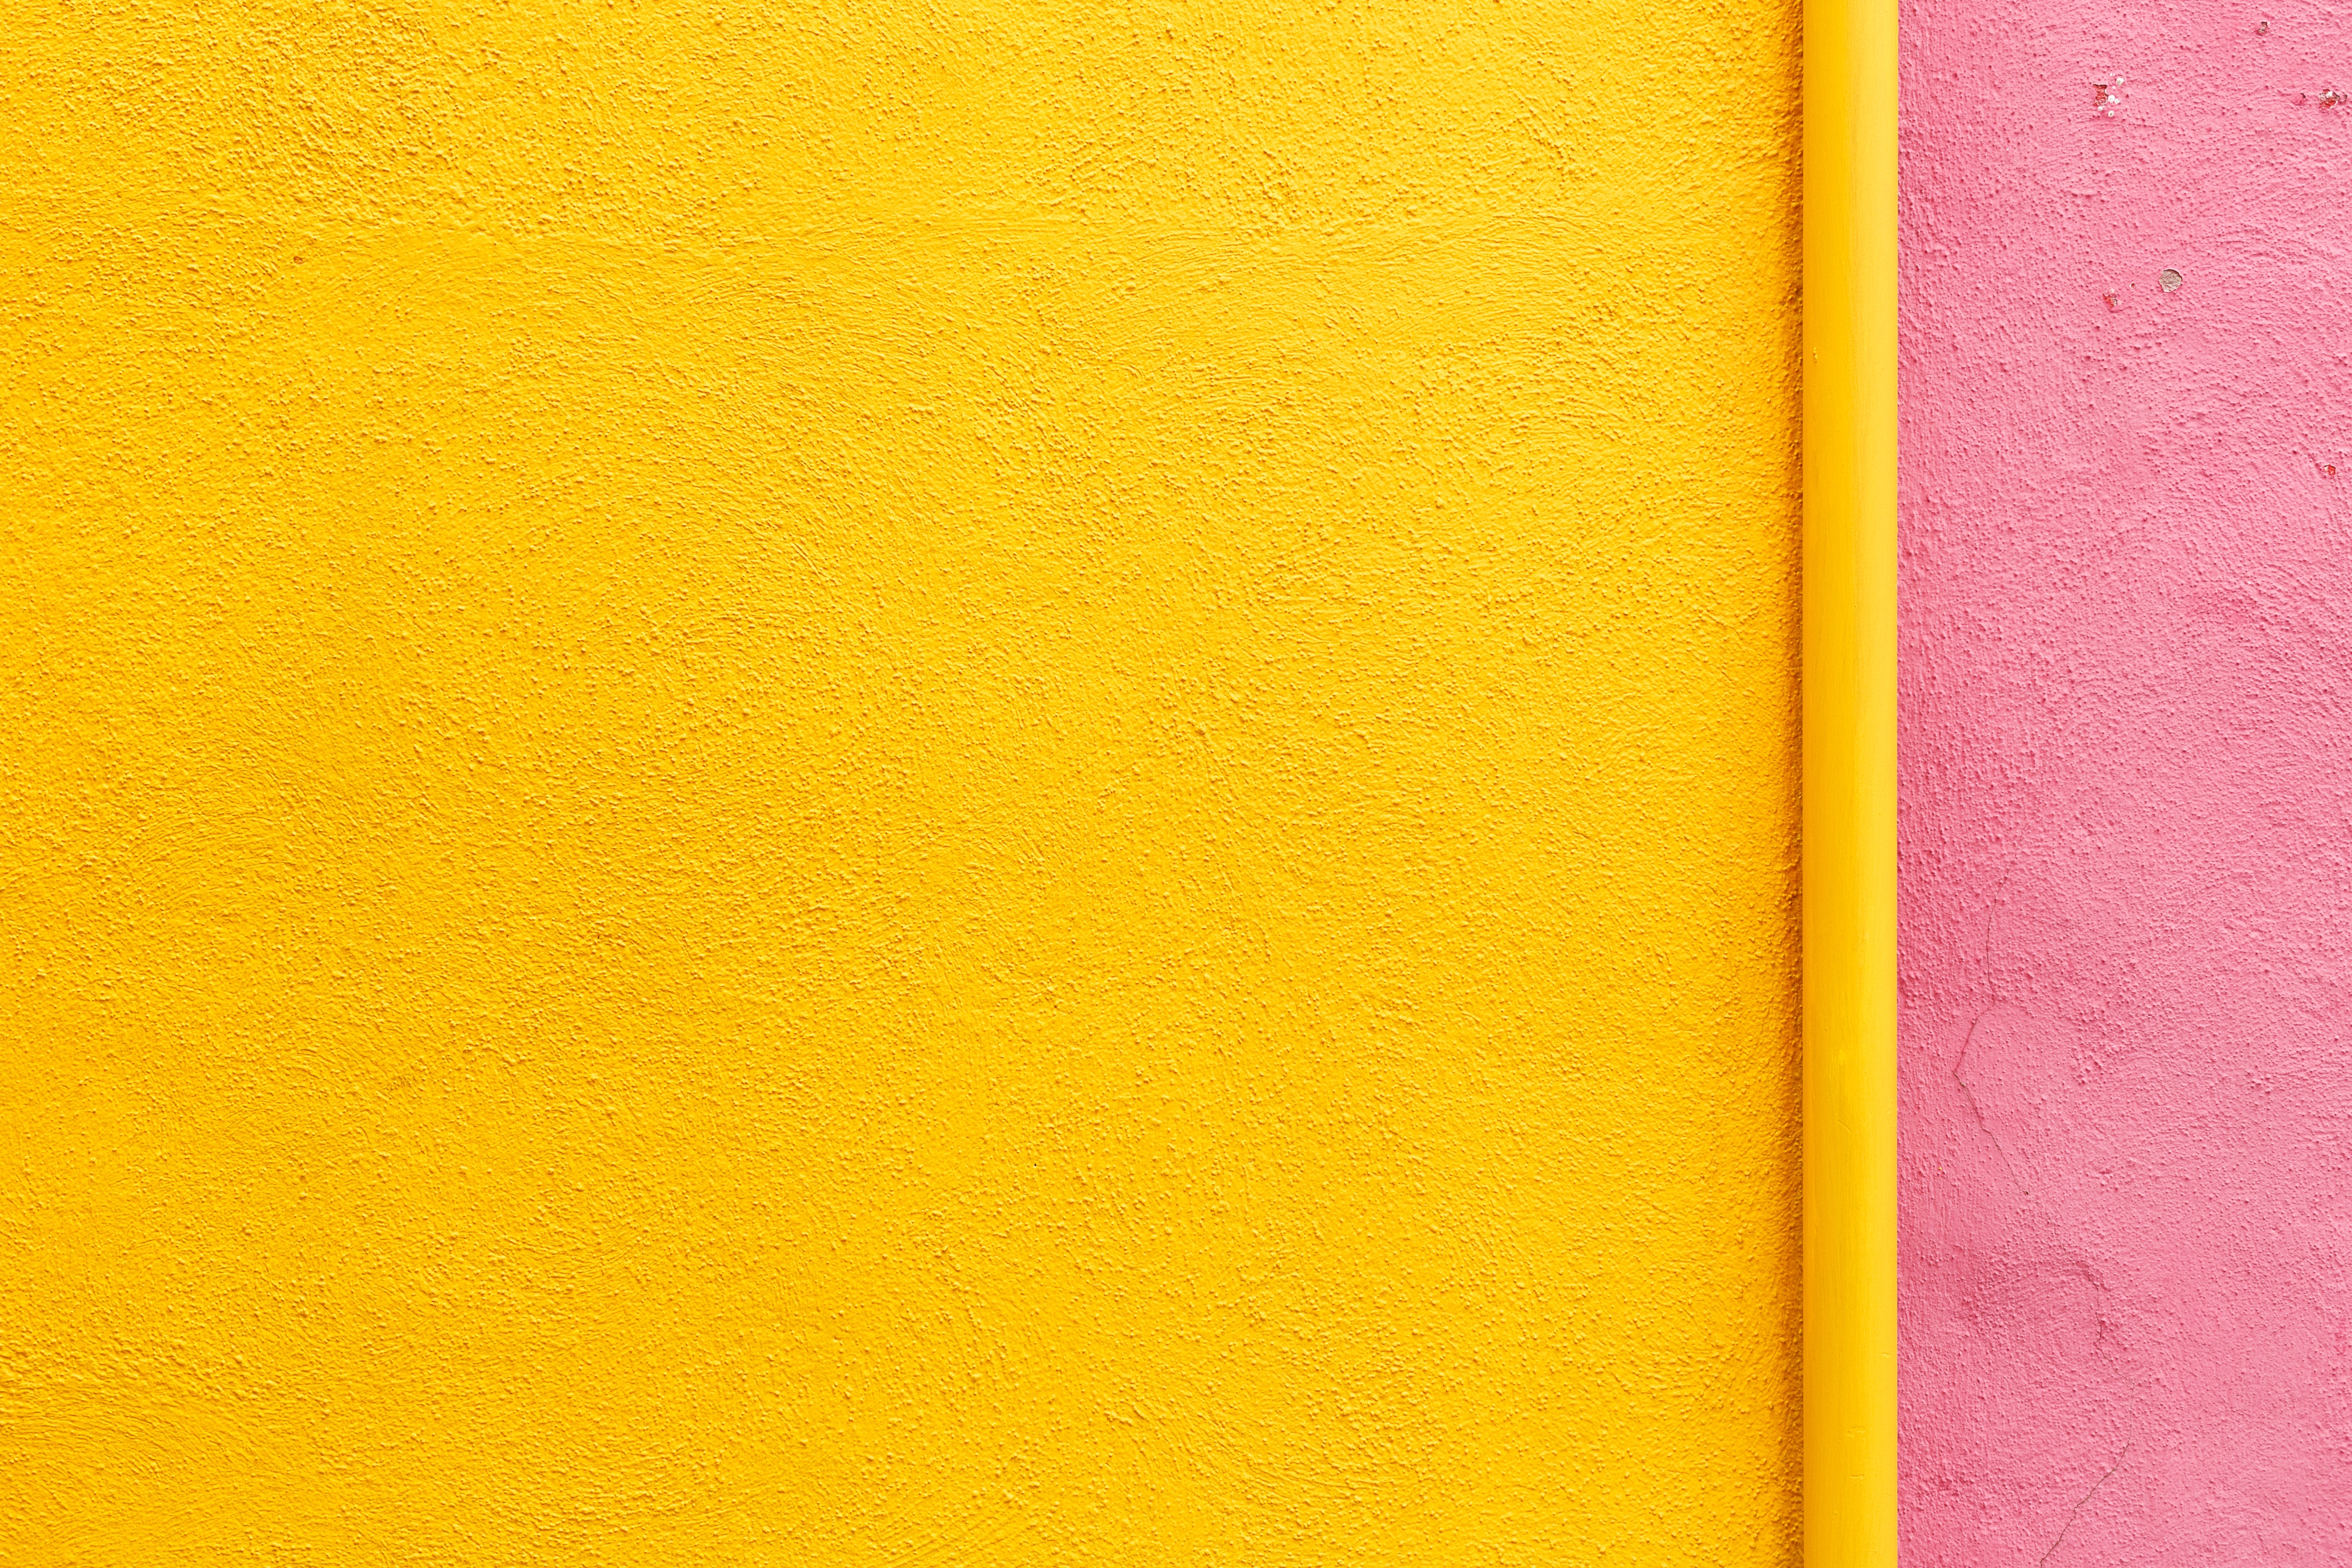 4500x3000 #inspiration, #painted, #pink, #simple, #bright, #background, #wall, #minimalism, #colourful, #detail, #texture, #Creative Commons image, #concrete, #yellow, #color, #colour. Mocah HD Wallpaper